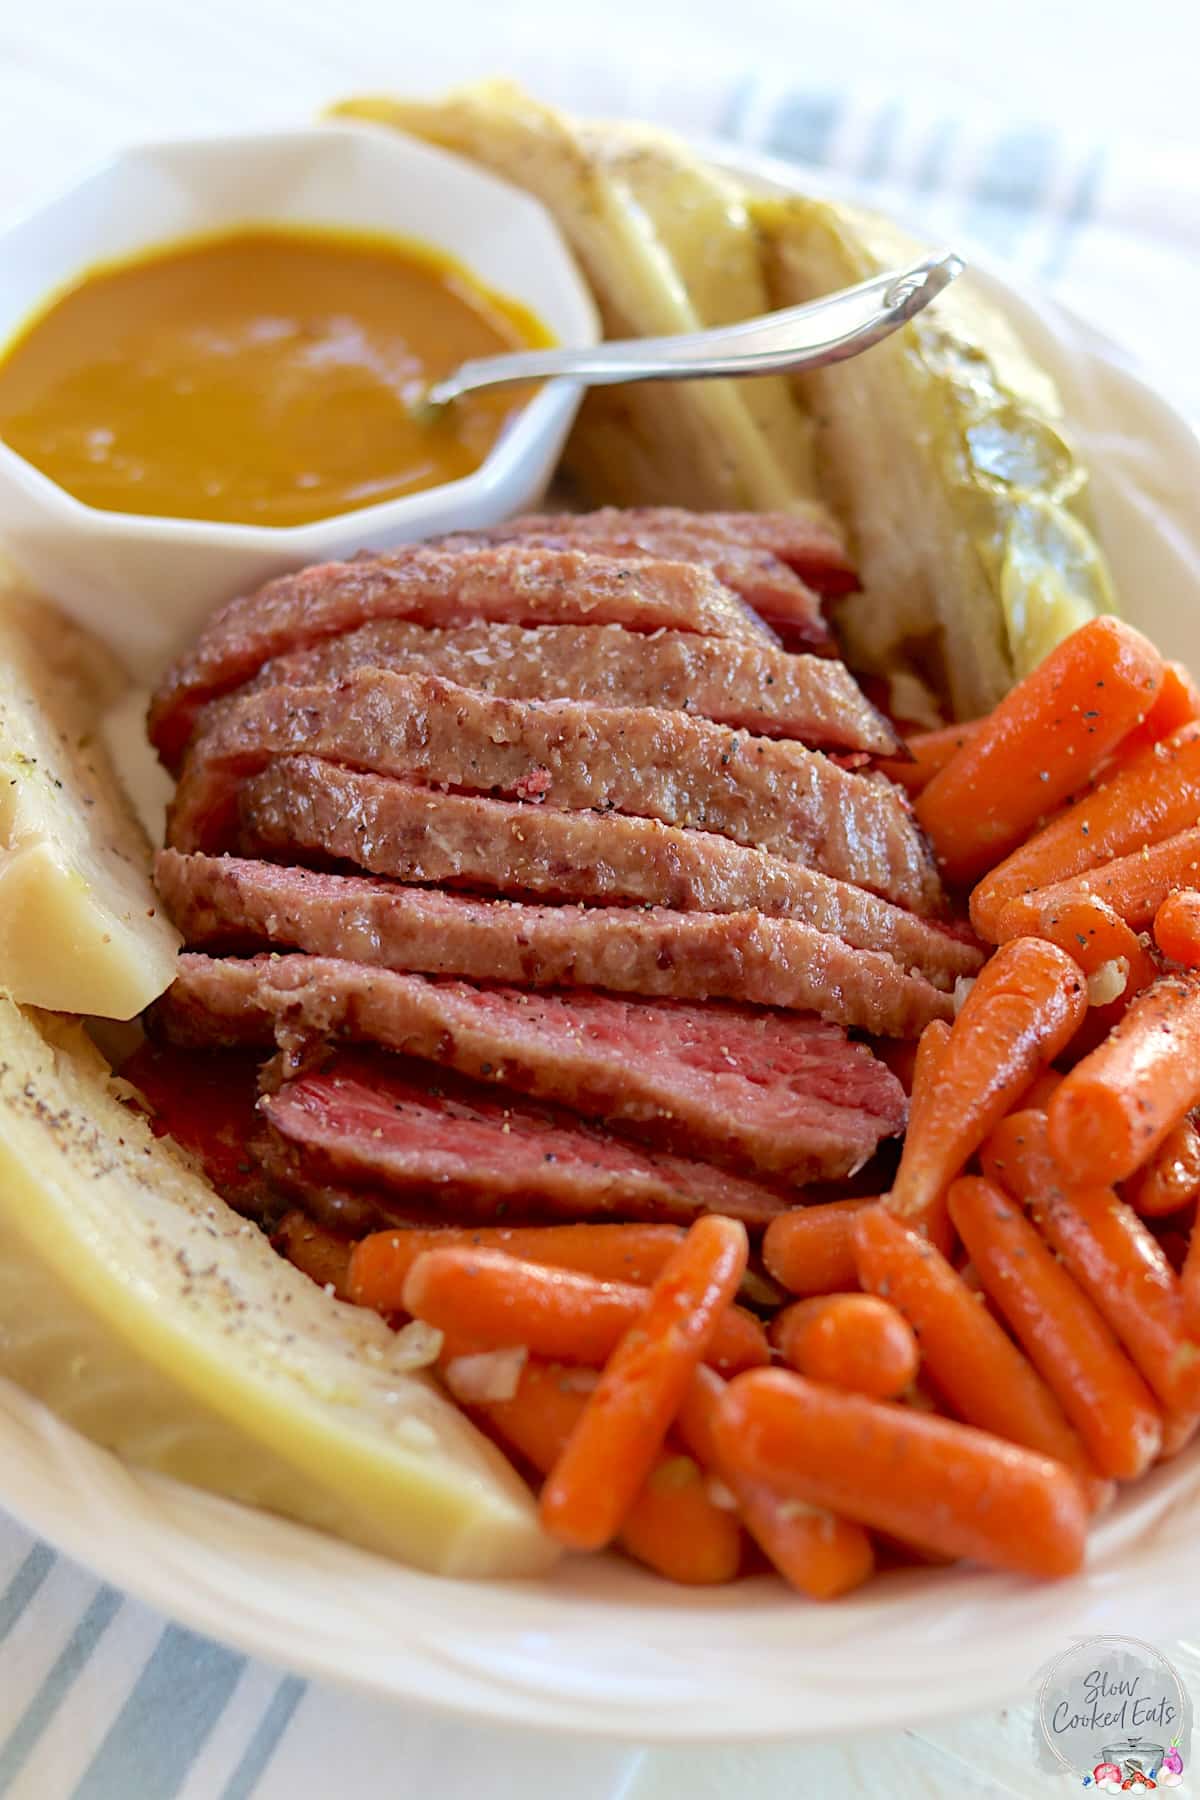 Sliced slow cooker corned beef and cabbage with carrots and mustard sauce on a white platter.